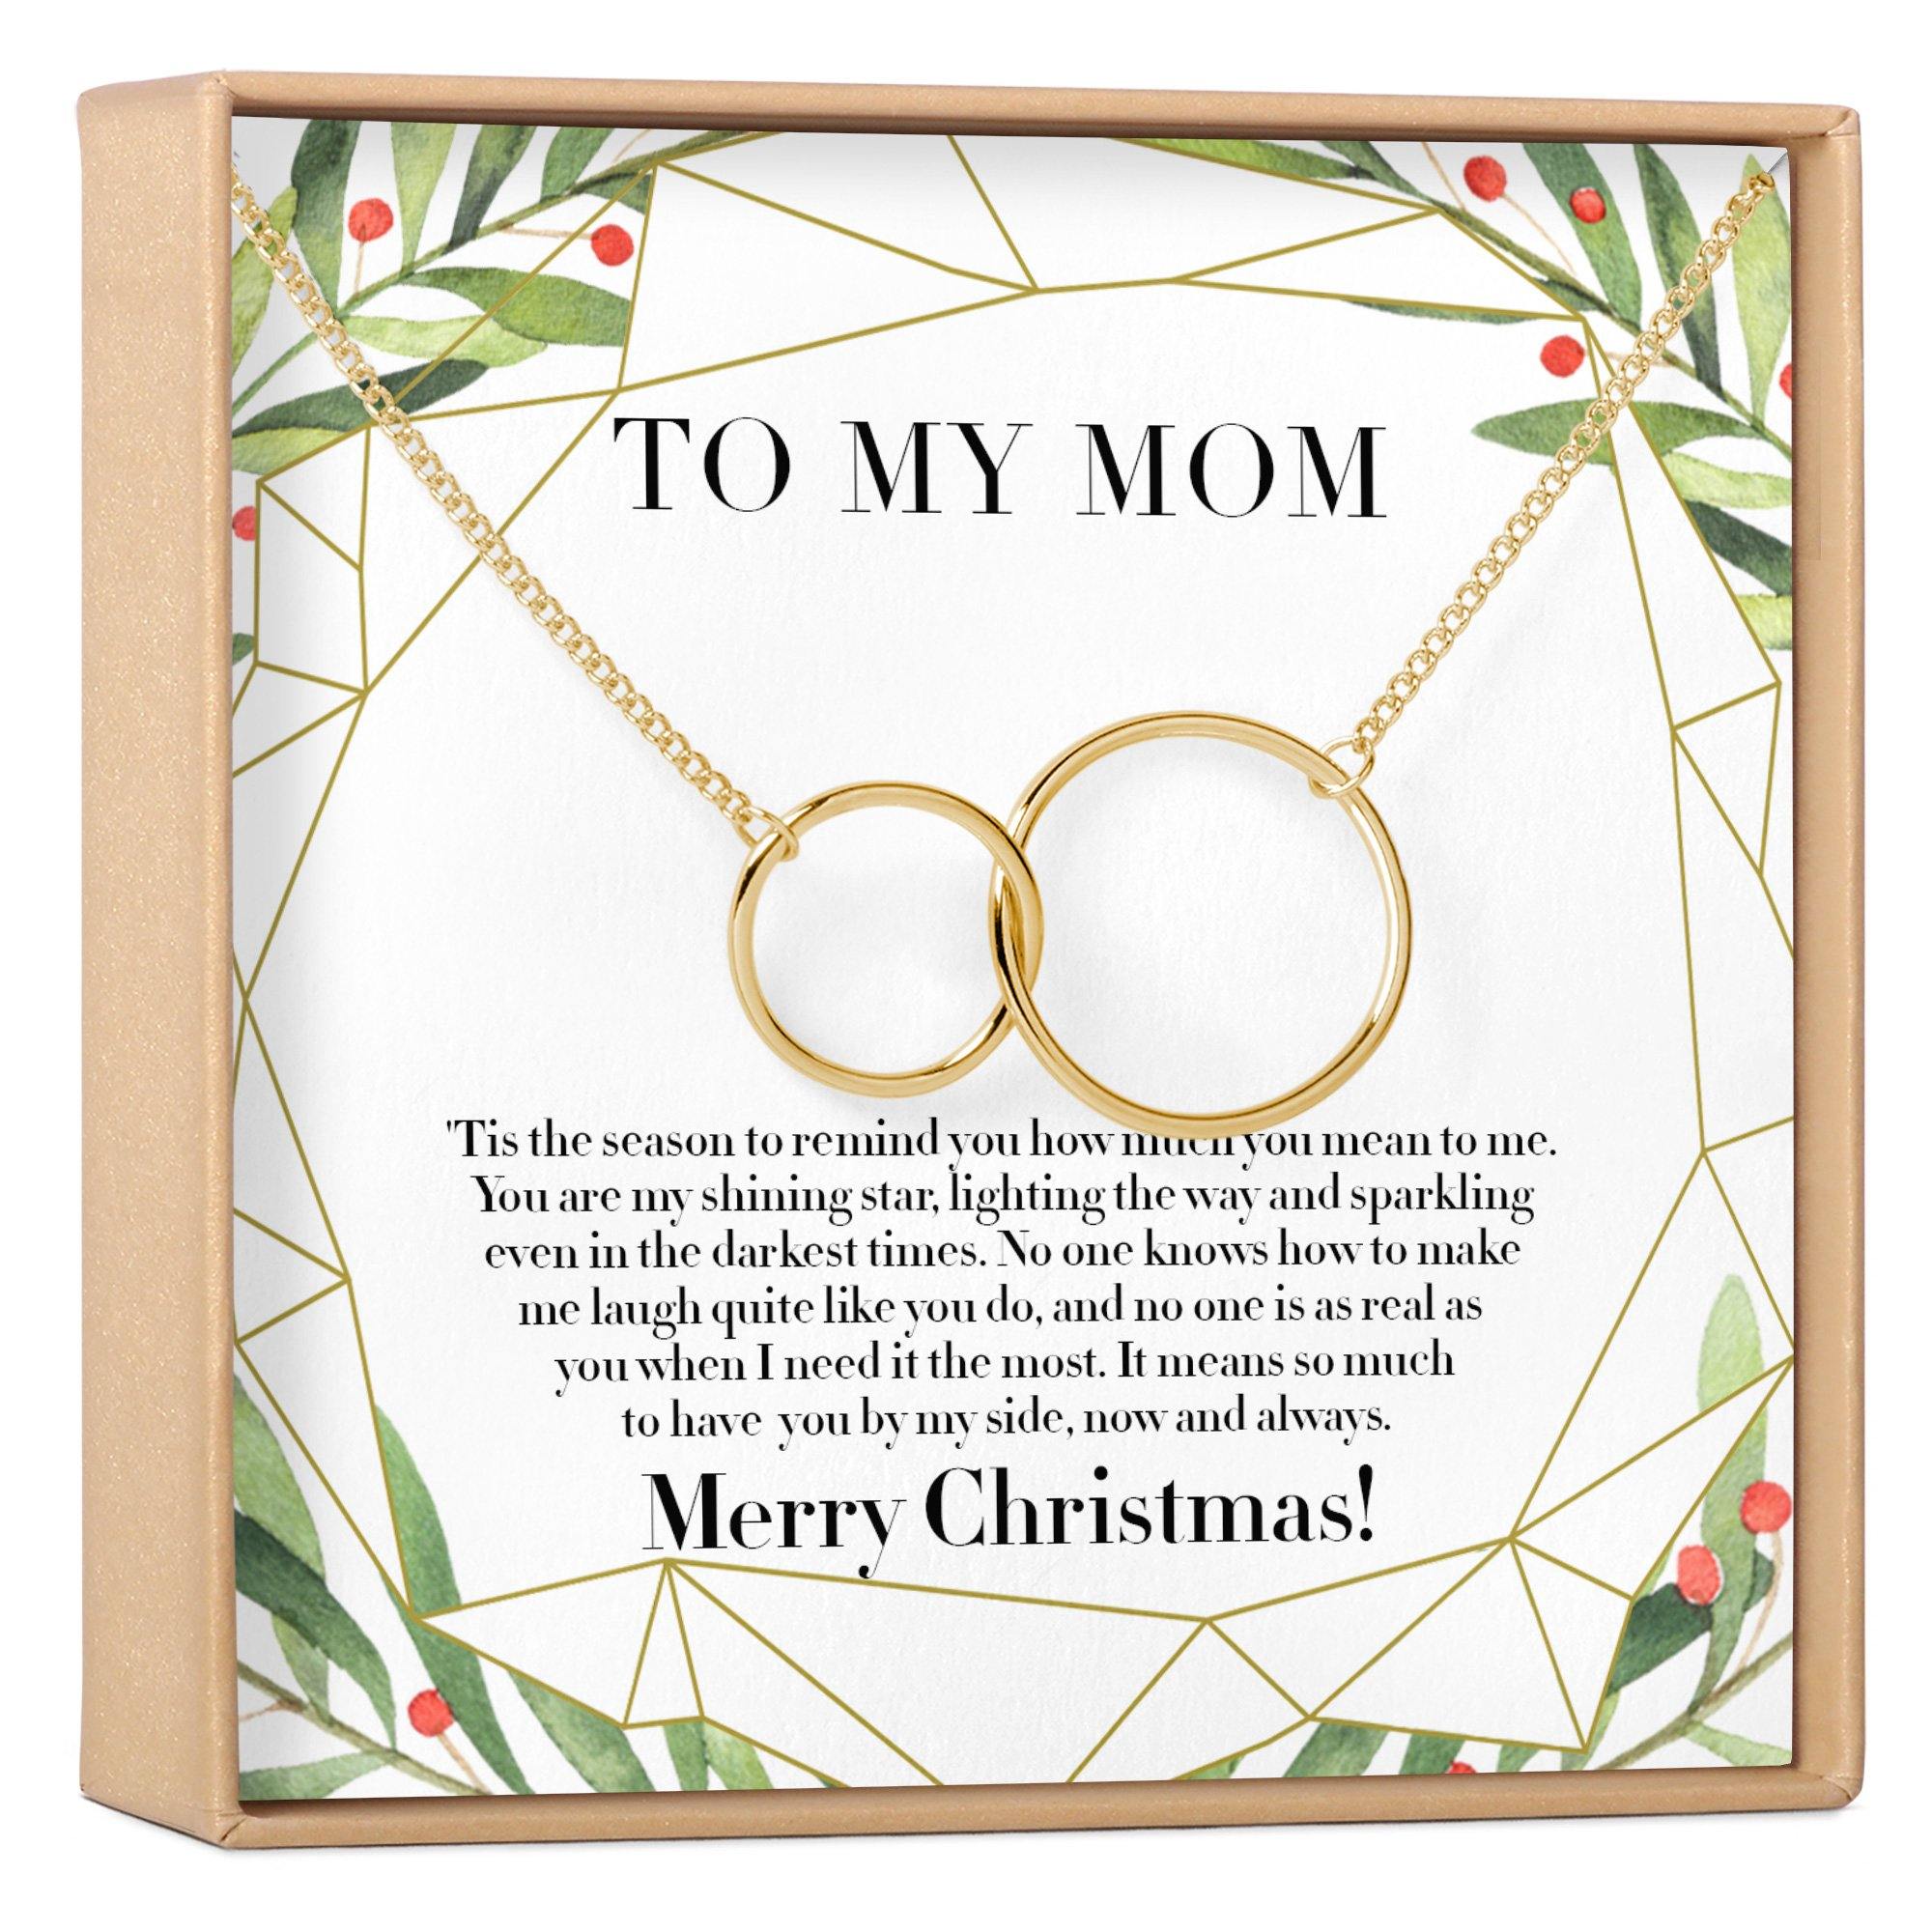 Christmas Gift for Mom: Present, Necklace, Jewelry, Xmas Gift, Holiday Gift,  Gift Idea, Mother, Mom Gift, Mother Daughter Gift, 2 Asymmetrical Circles -  Dear Ava